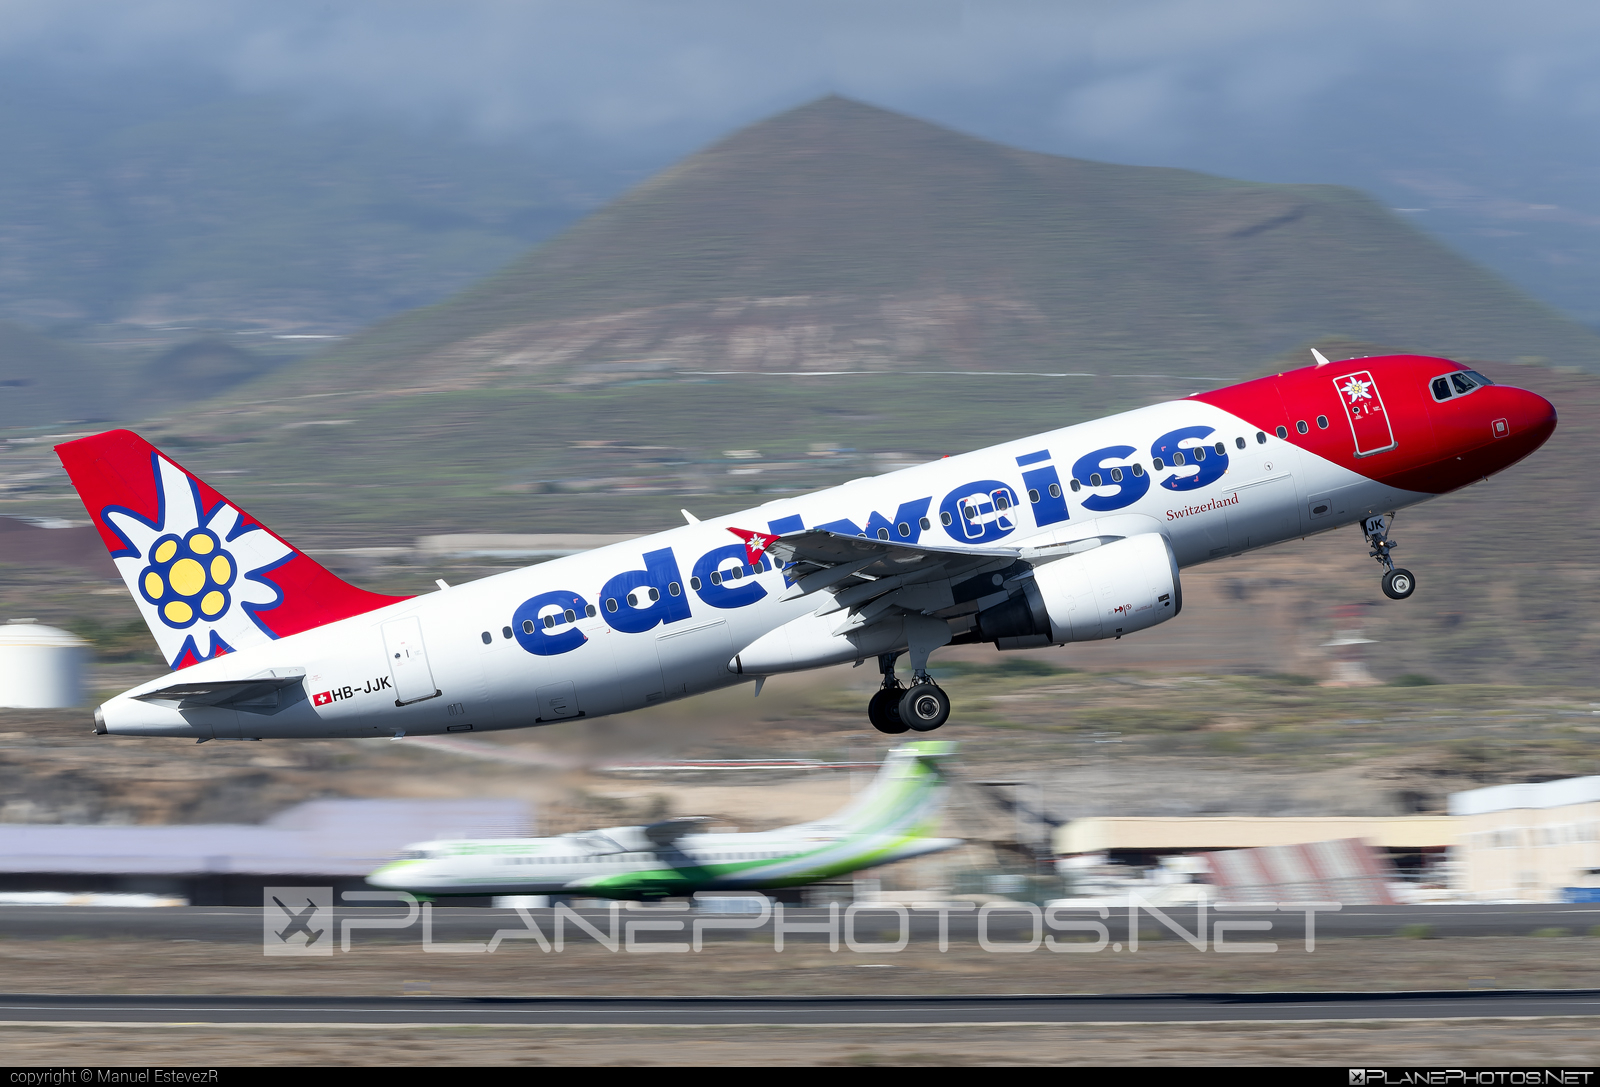 Airbus A320-214 - HB-JJK operated by Edelweiss Air #EdelweissAir #a320 #a320family #airbus #airbus320